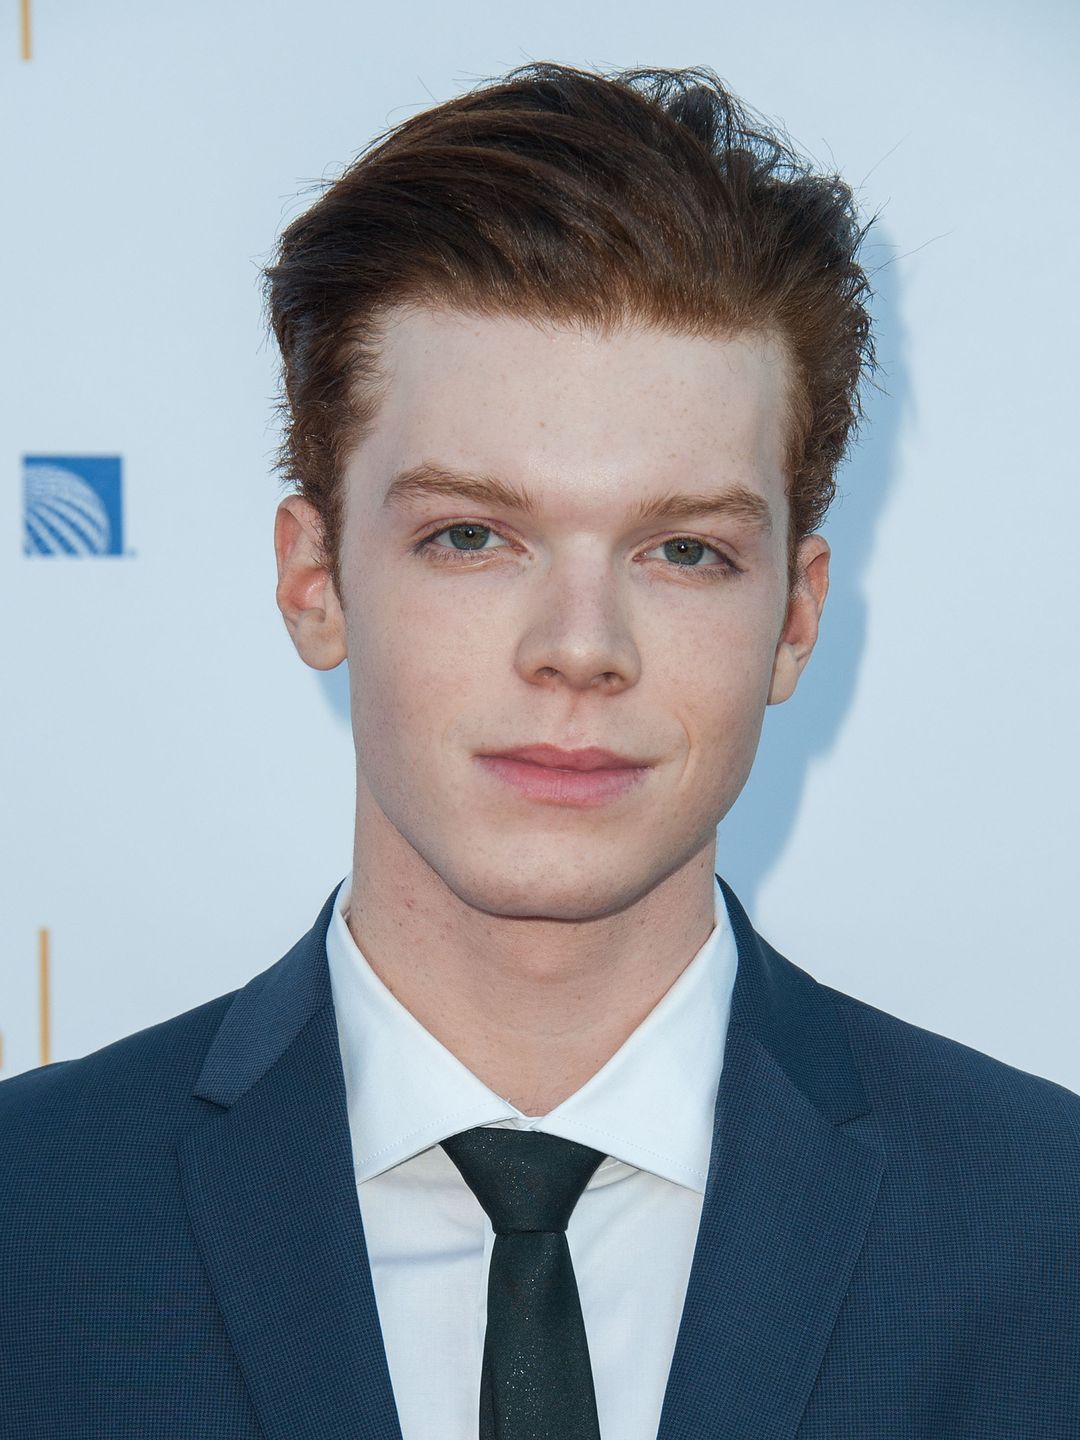 Cameron Monaghan does he have a wife